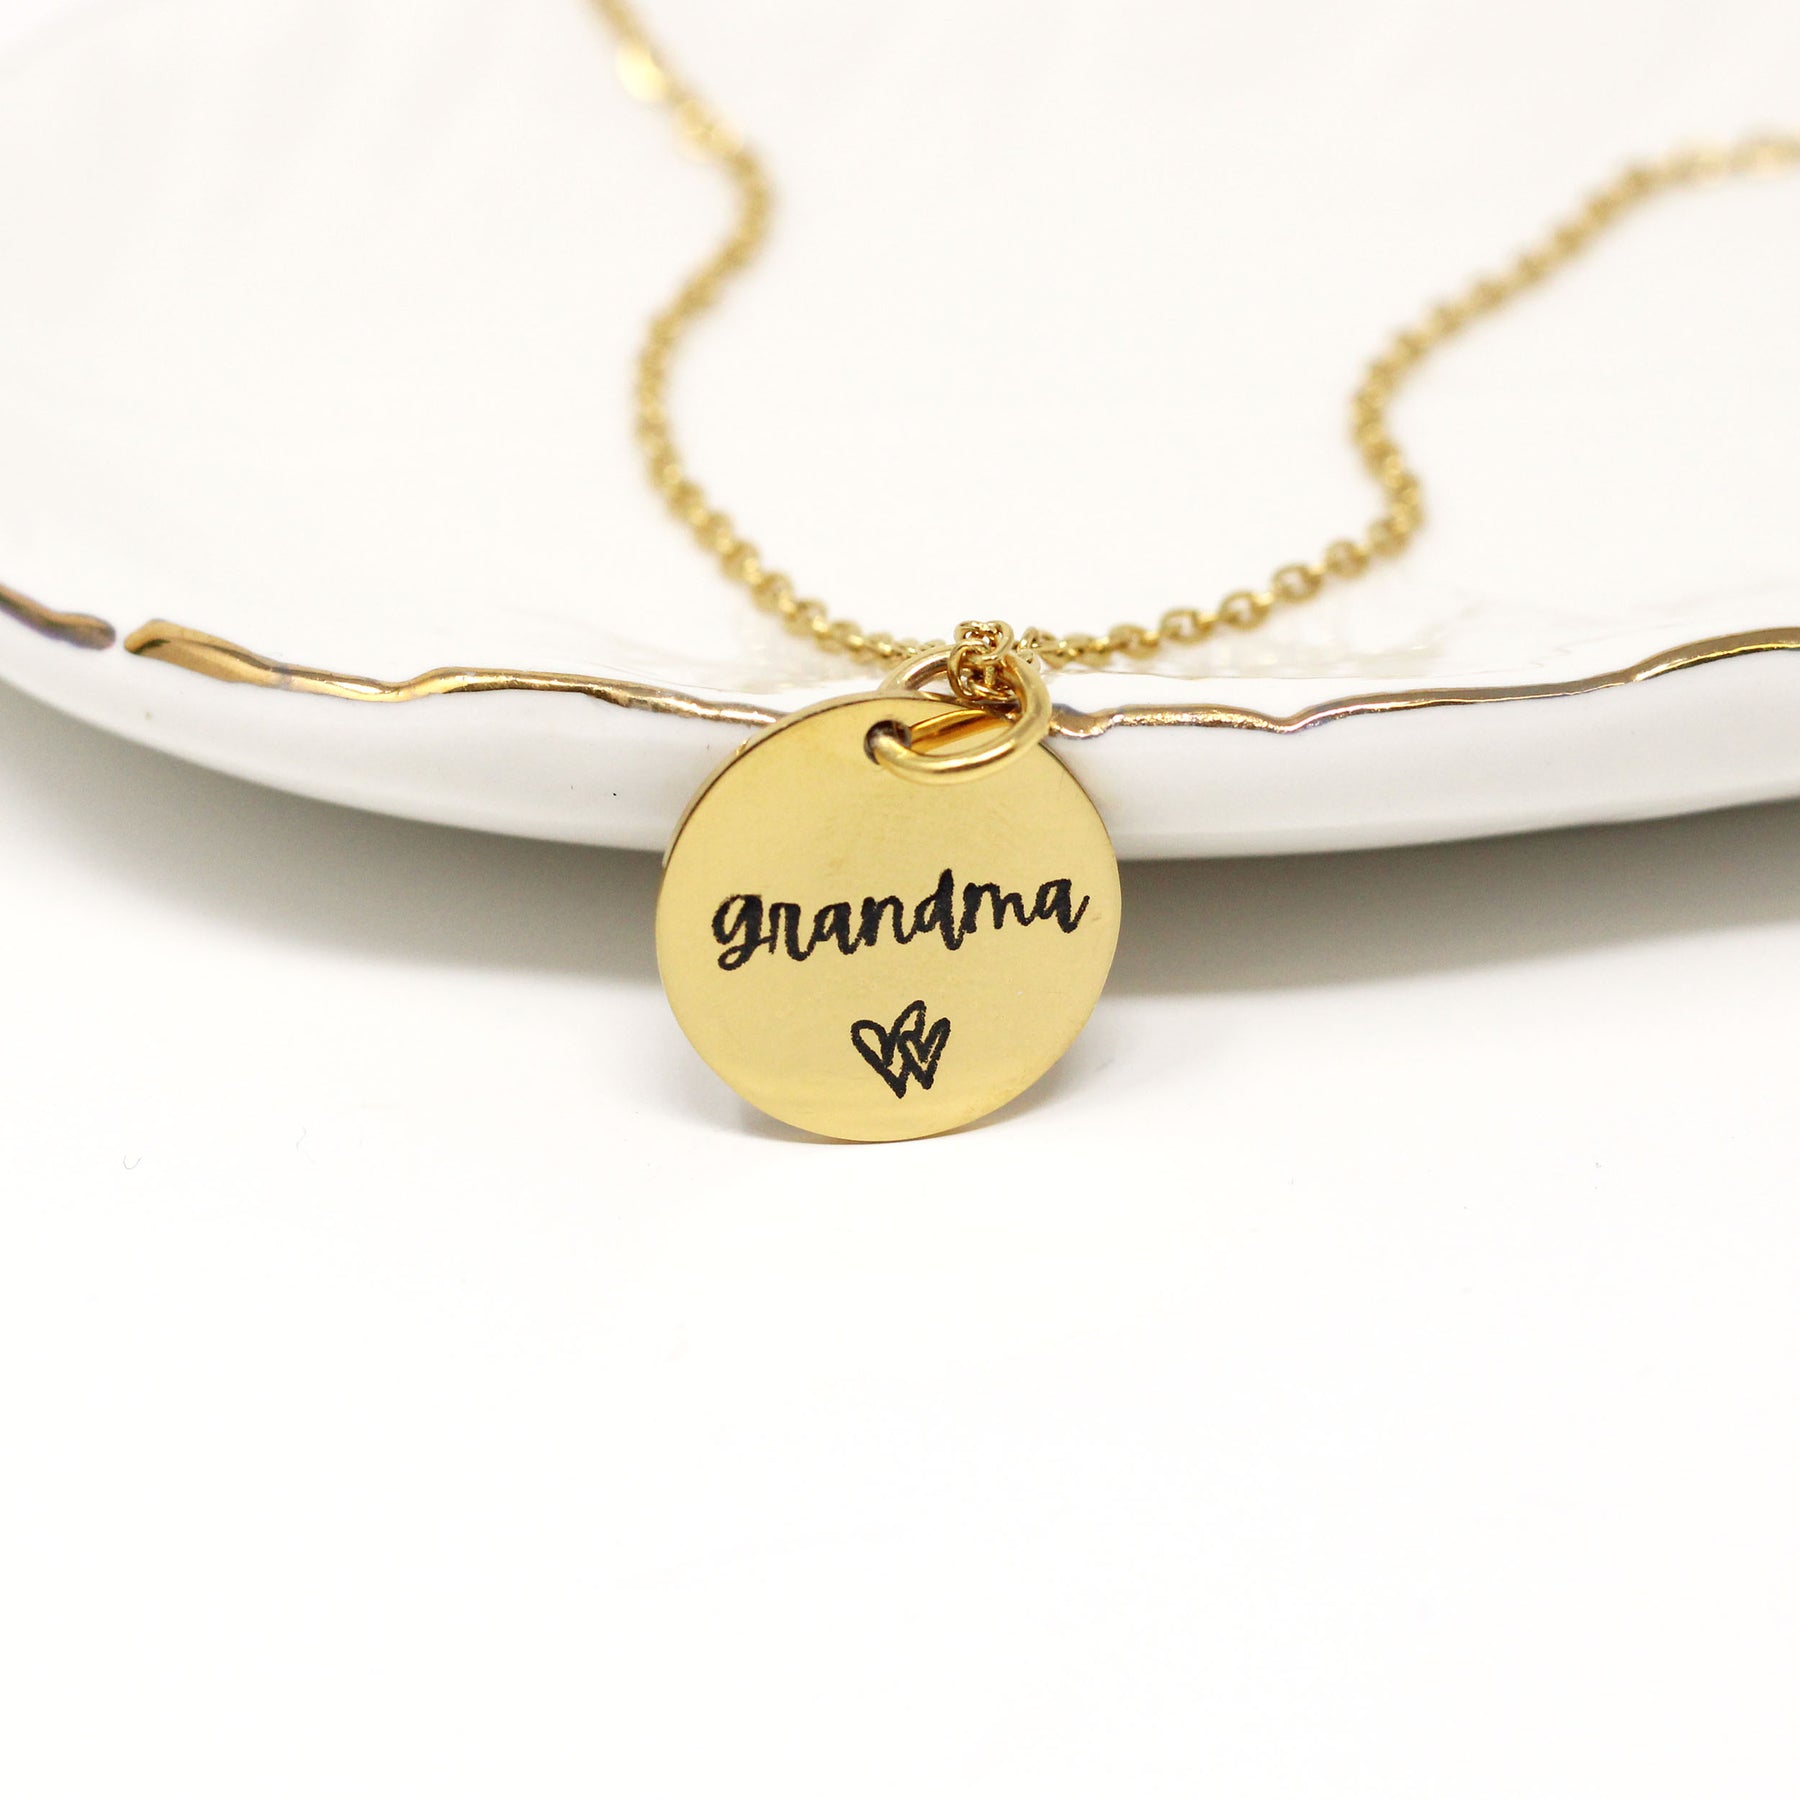 Buy Birthstone Necklace With Childrens Names for Mom, Mother, Grandma,  Sister, Aunt, Mother's Day Gift Online in India - Etsy